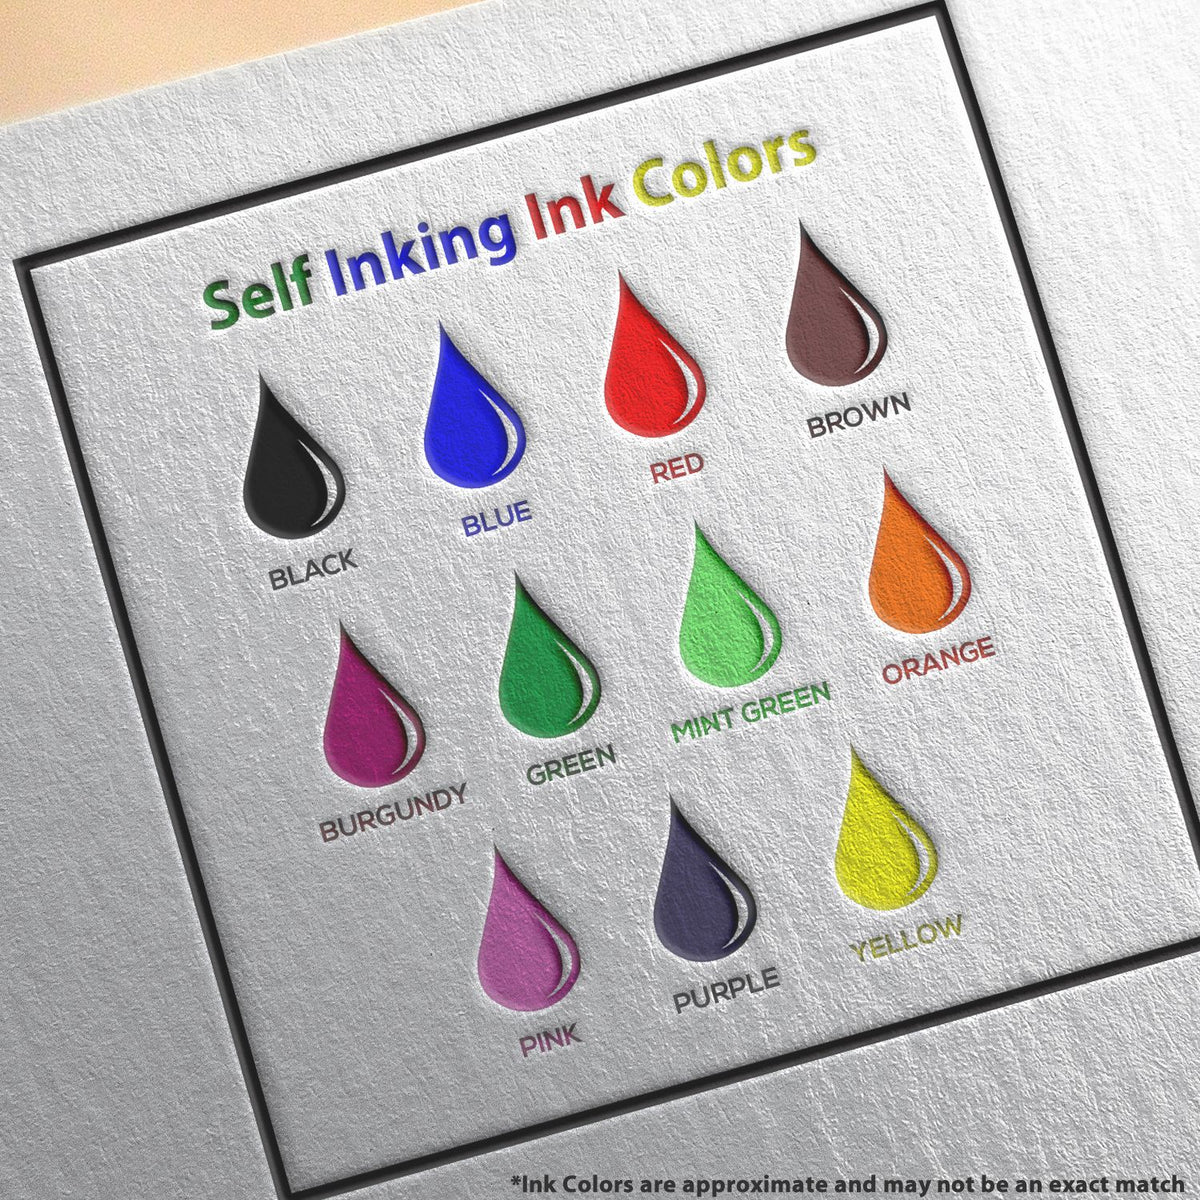 A picture showing the different ink colors or hues available for the Self-Inking Guam Geologist Stamp